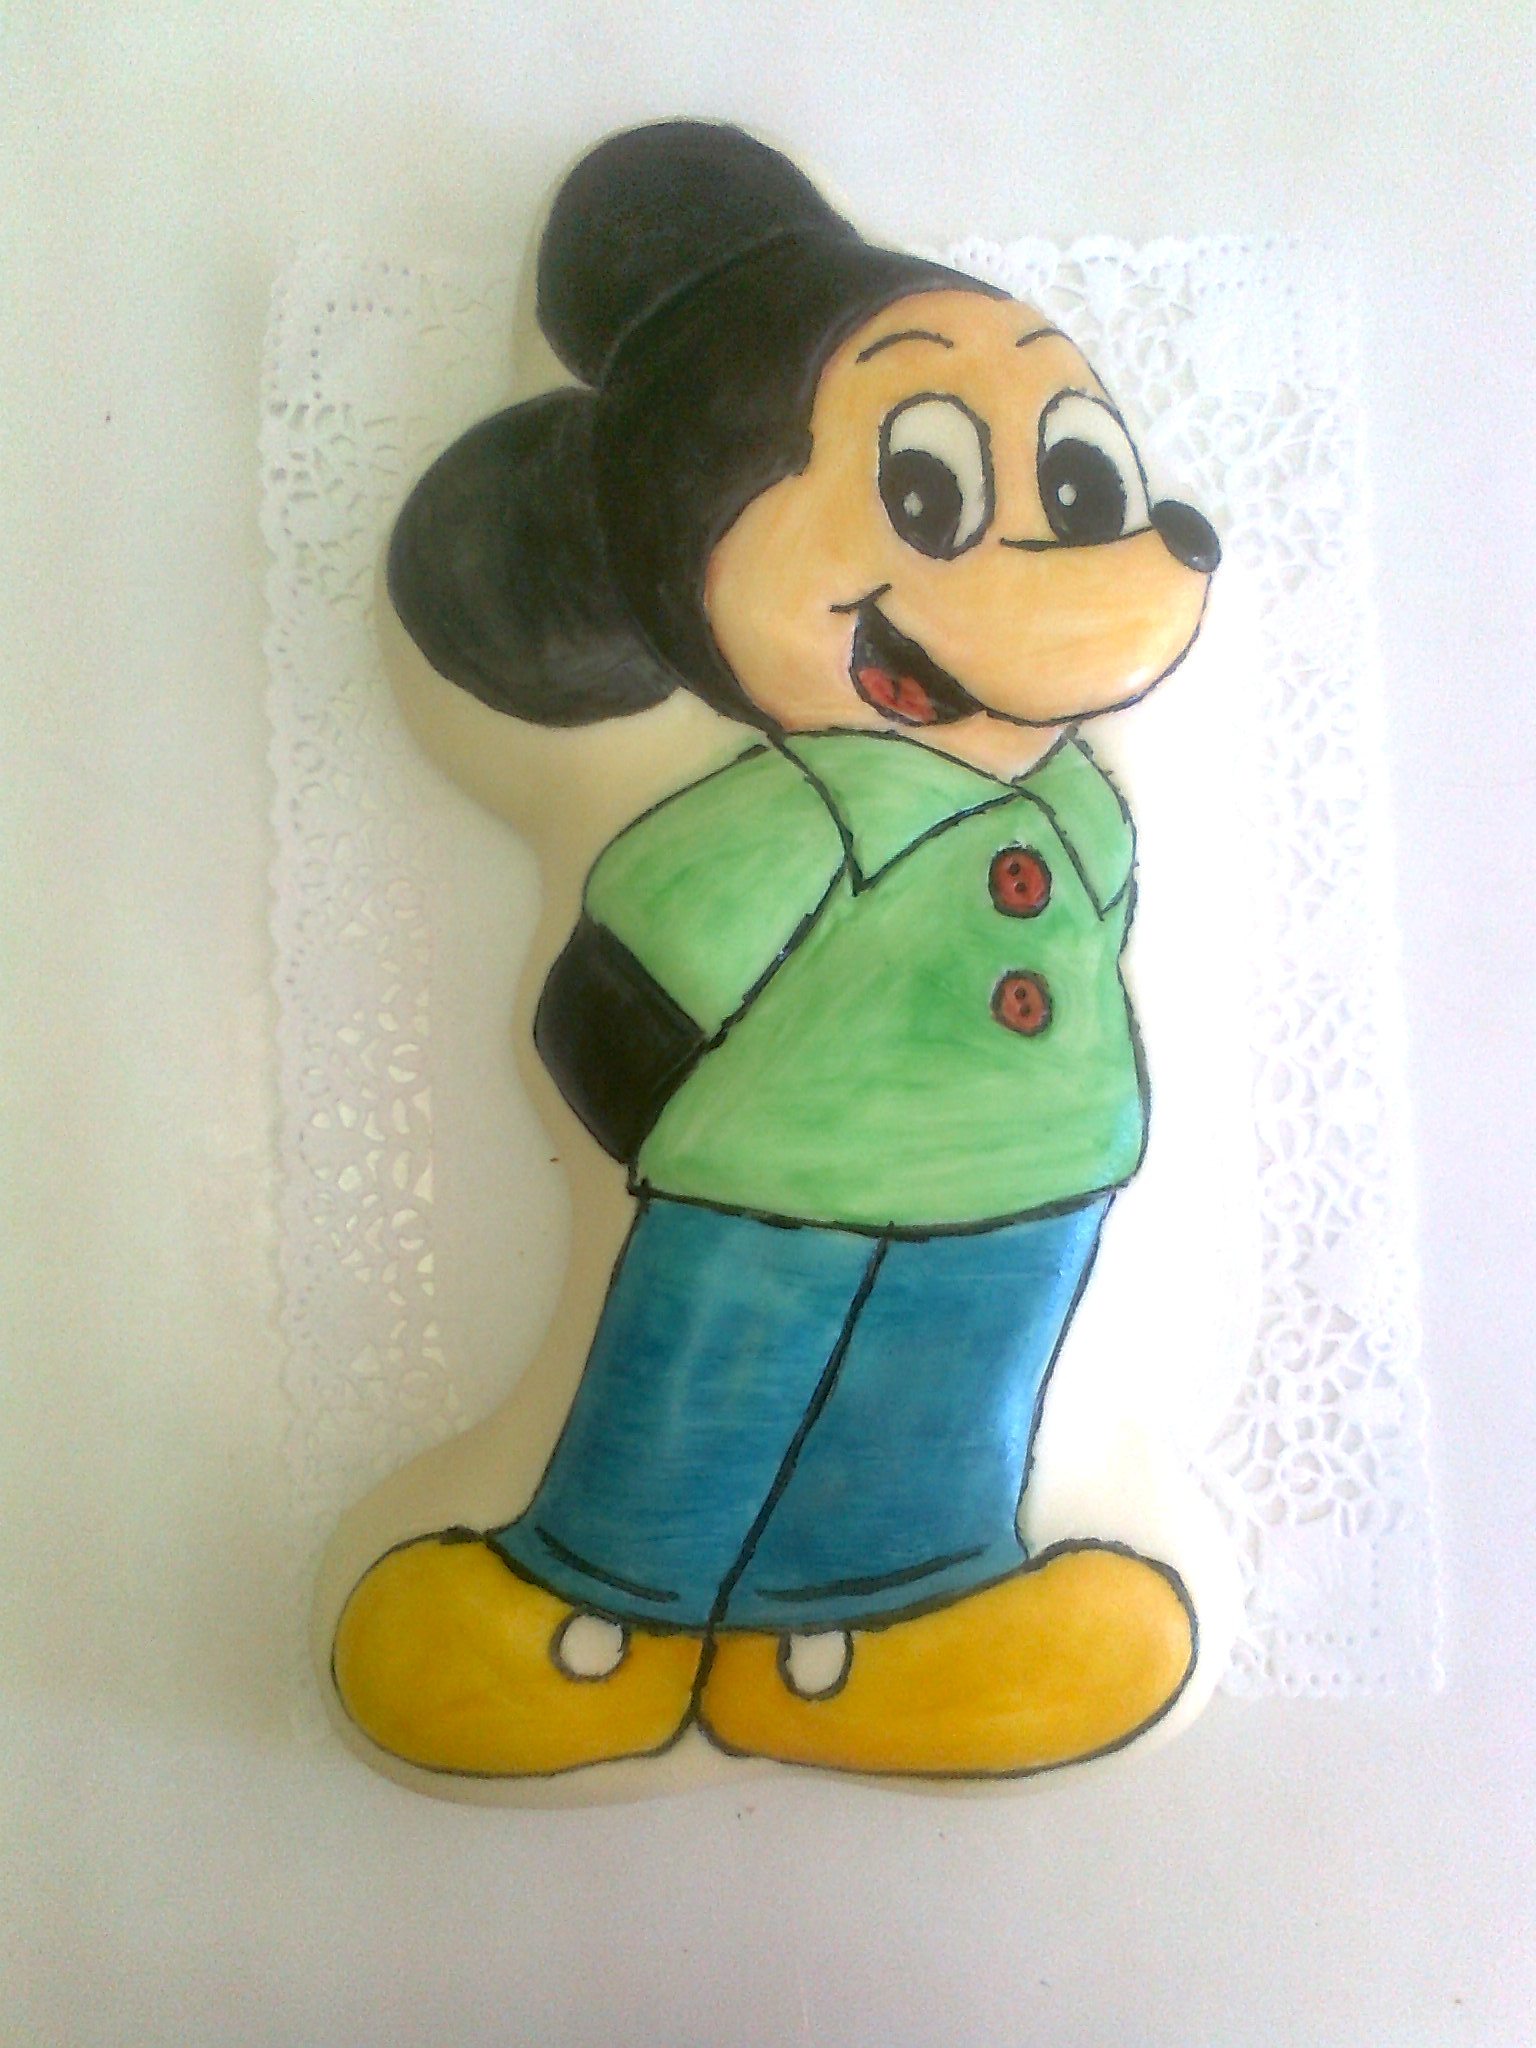 Mickey mousse